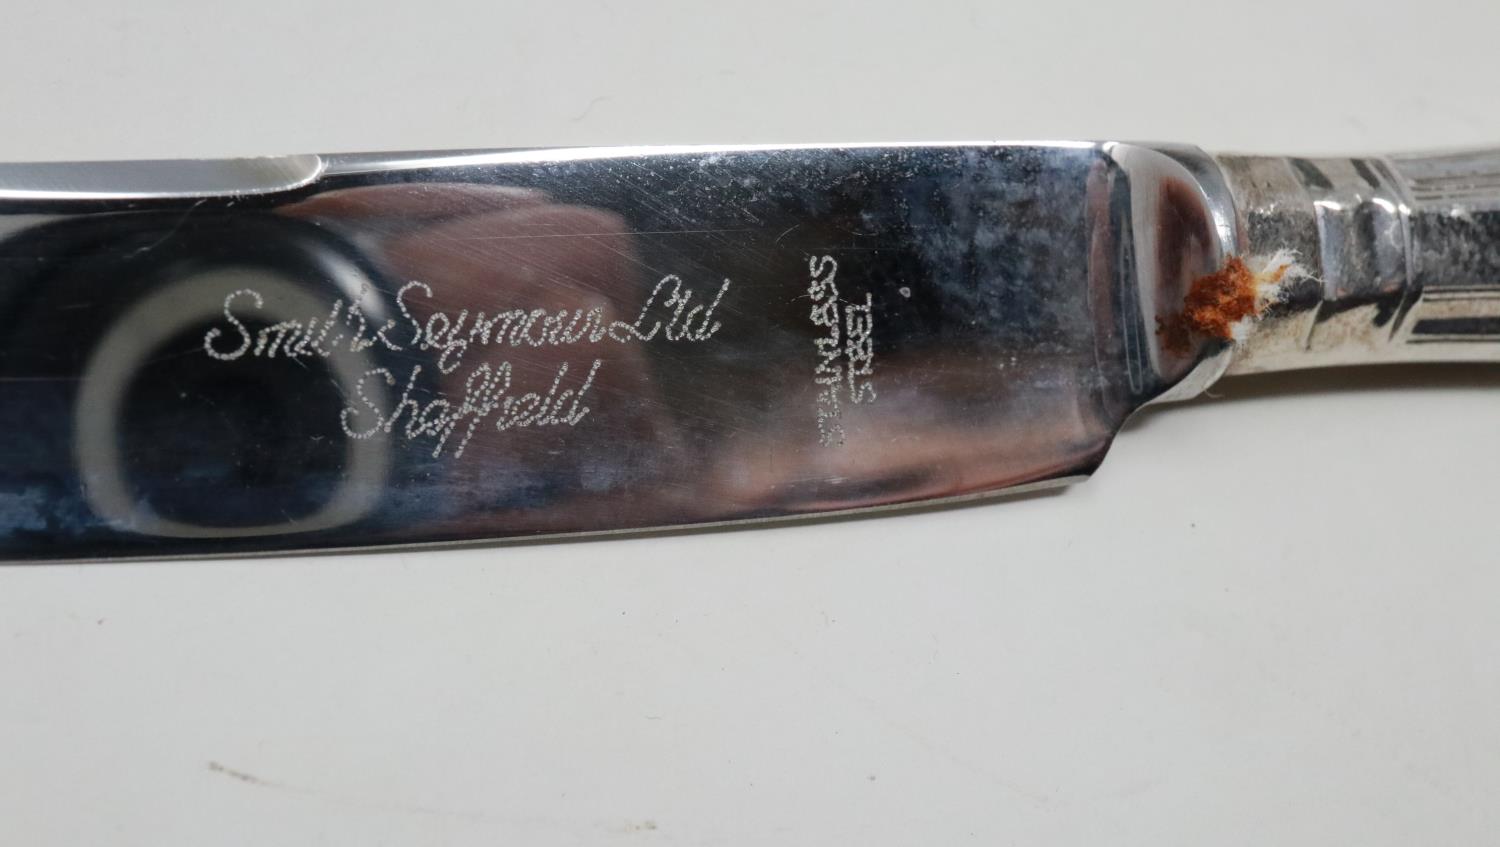 Smith Seymour Ltd canteen of stainless steel cutlery in the Kings pattern, forty four pieces. Not - Image 3 of 3